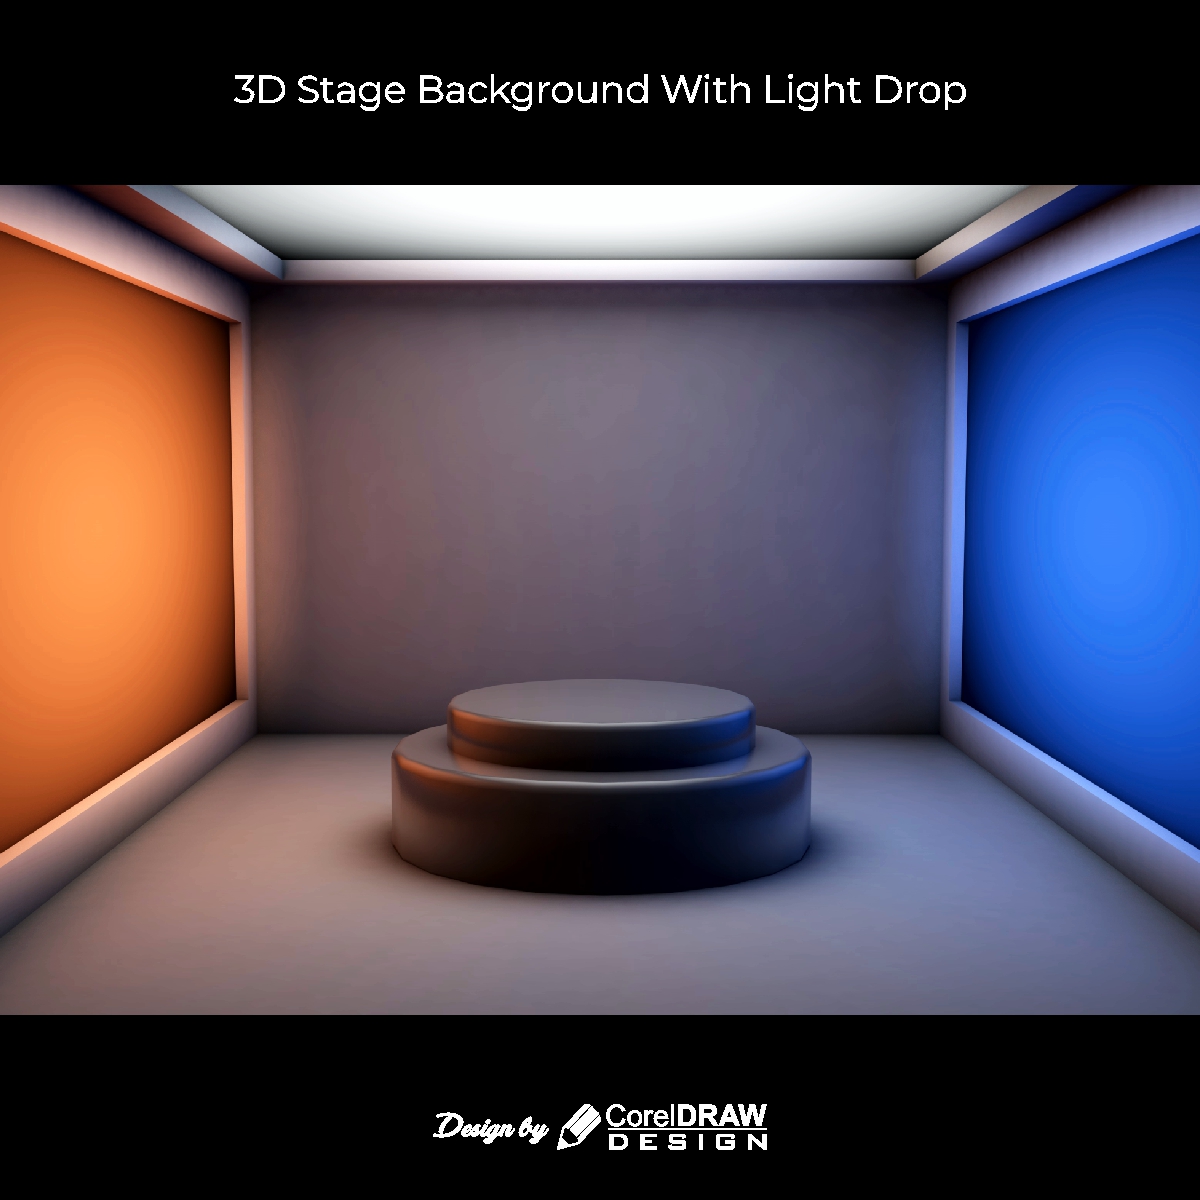 3D STAGE BACKGROUND WITH LIGHT DROP